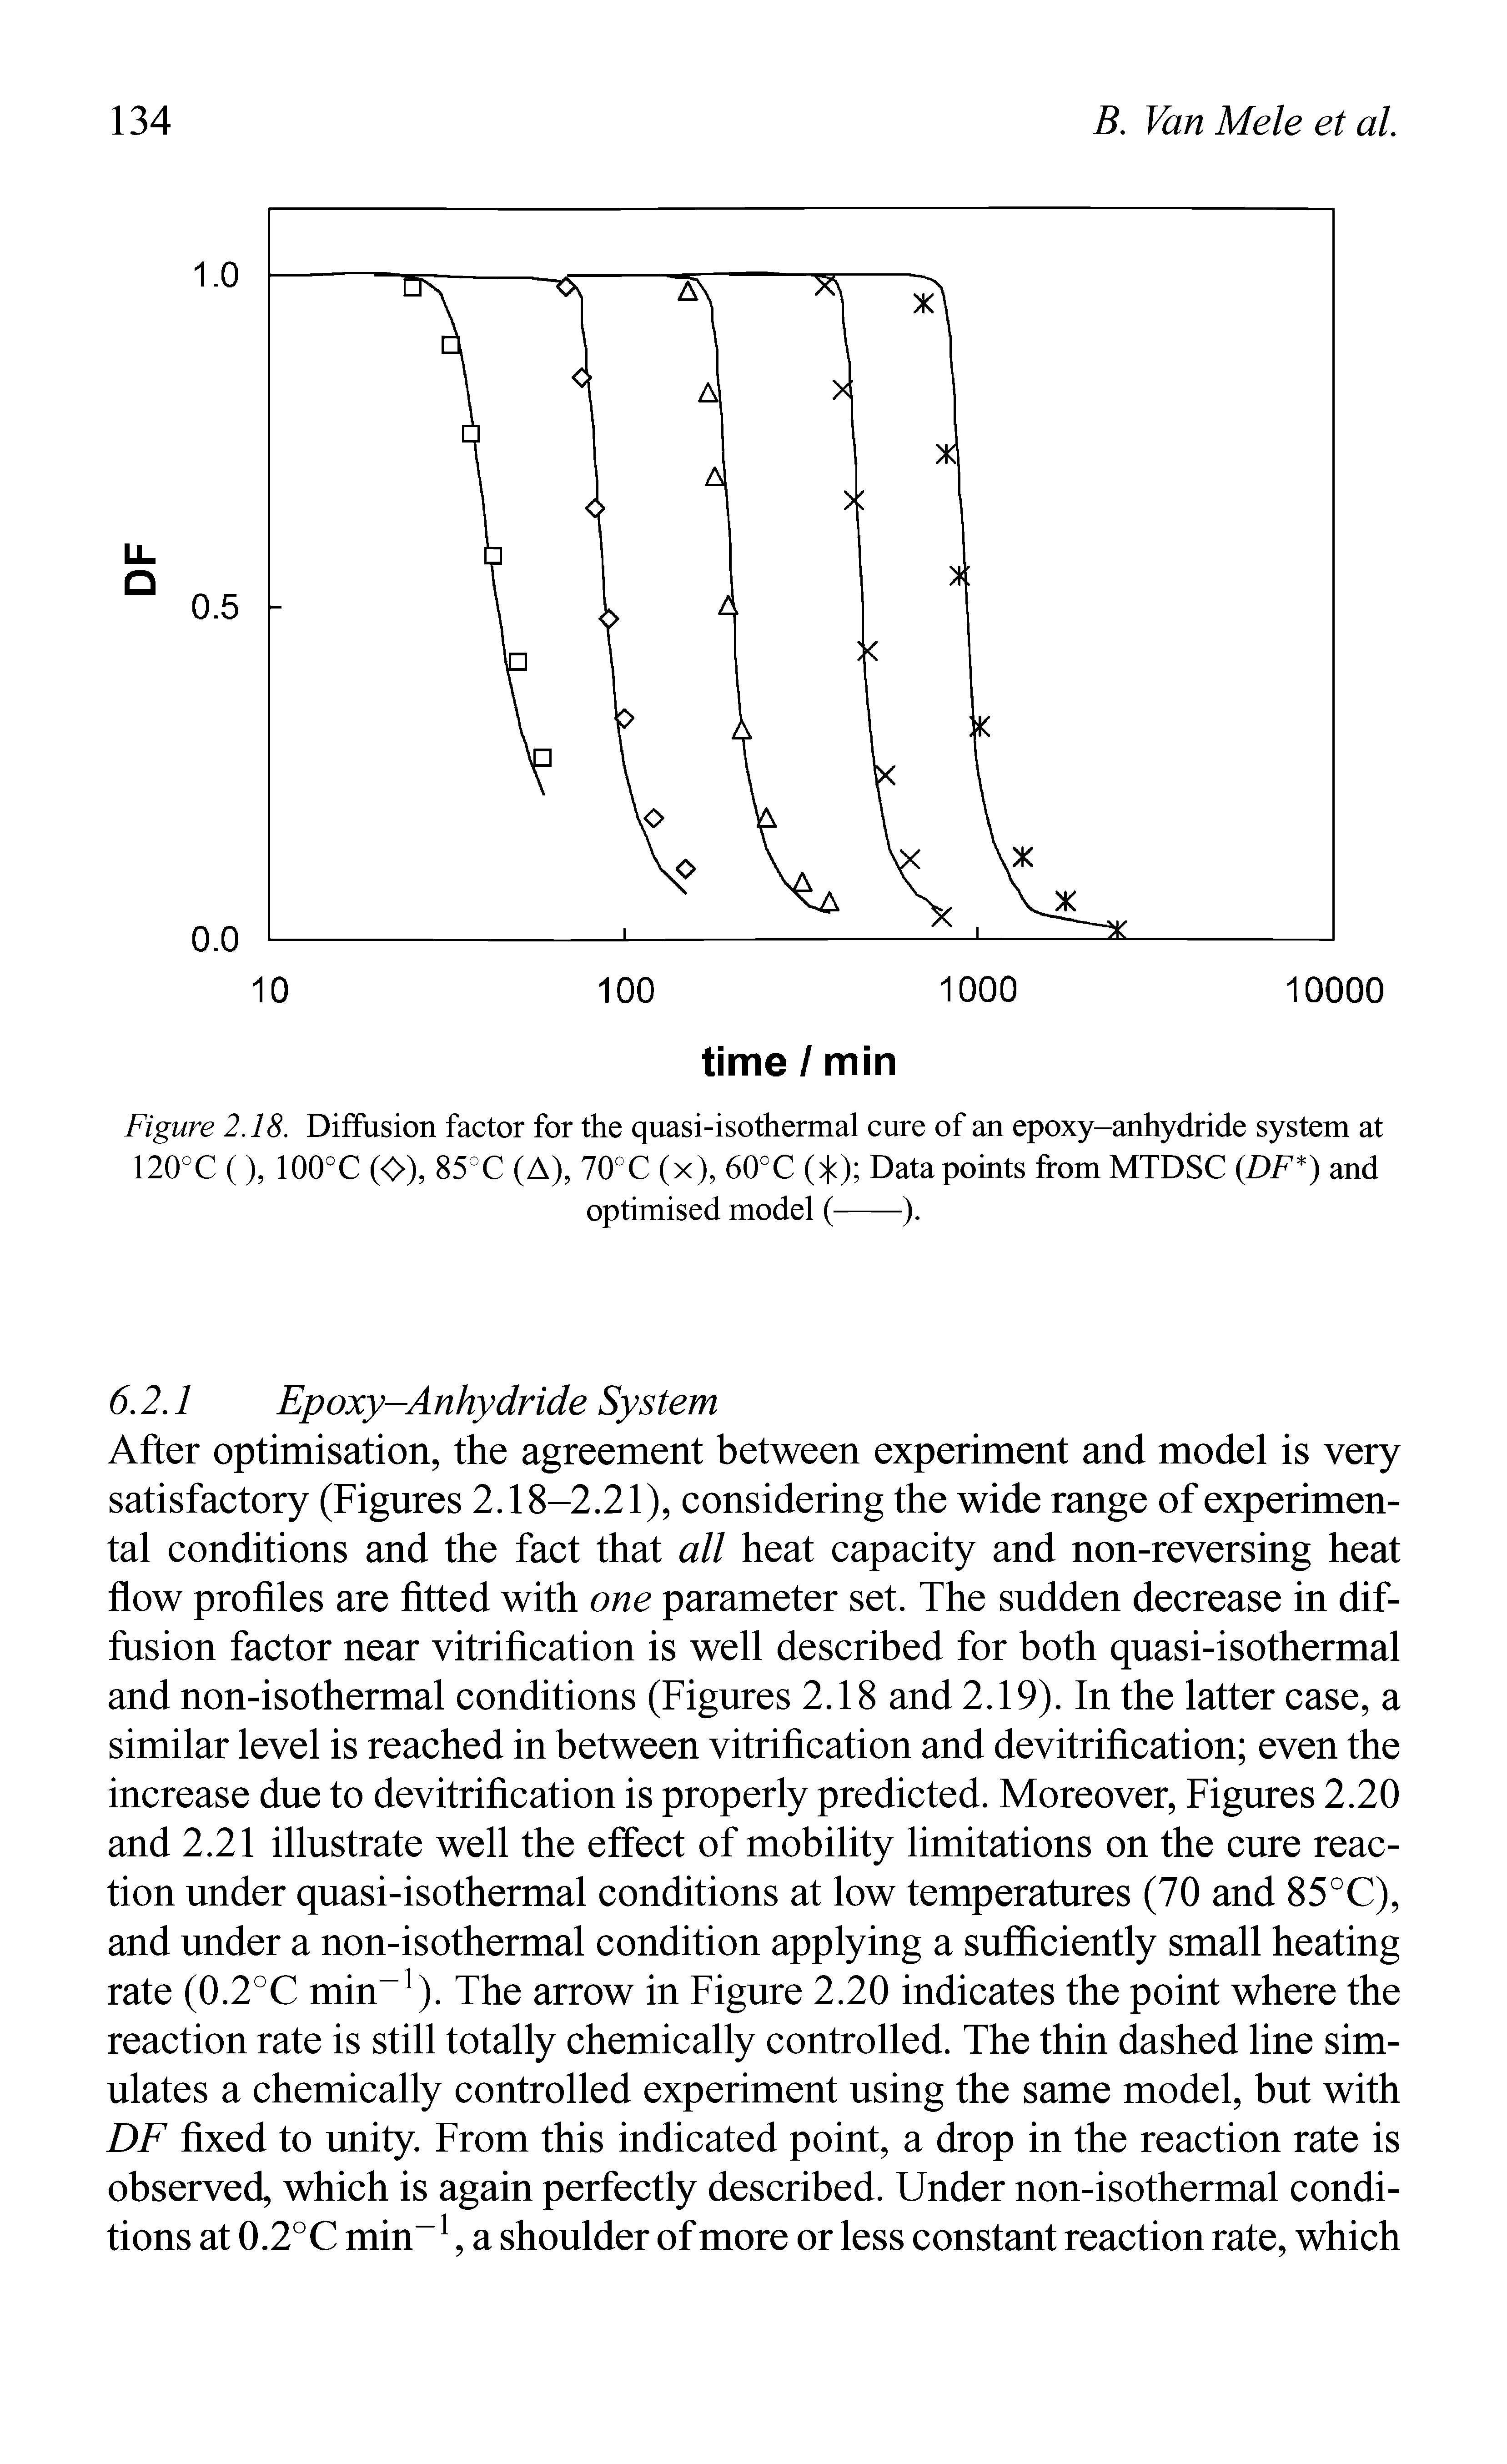 Figure 2.18. Diffusion factor for the quasi-isothermal cure of an epoxy-anhydride system at 120°C (), 100°C (O), 85°C (A), 70°C (x), 60°C (> ) Data points from MTDSC (DF ) and...